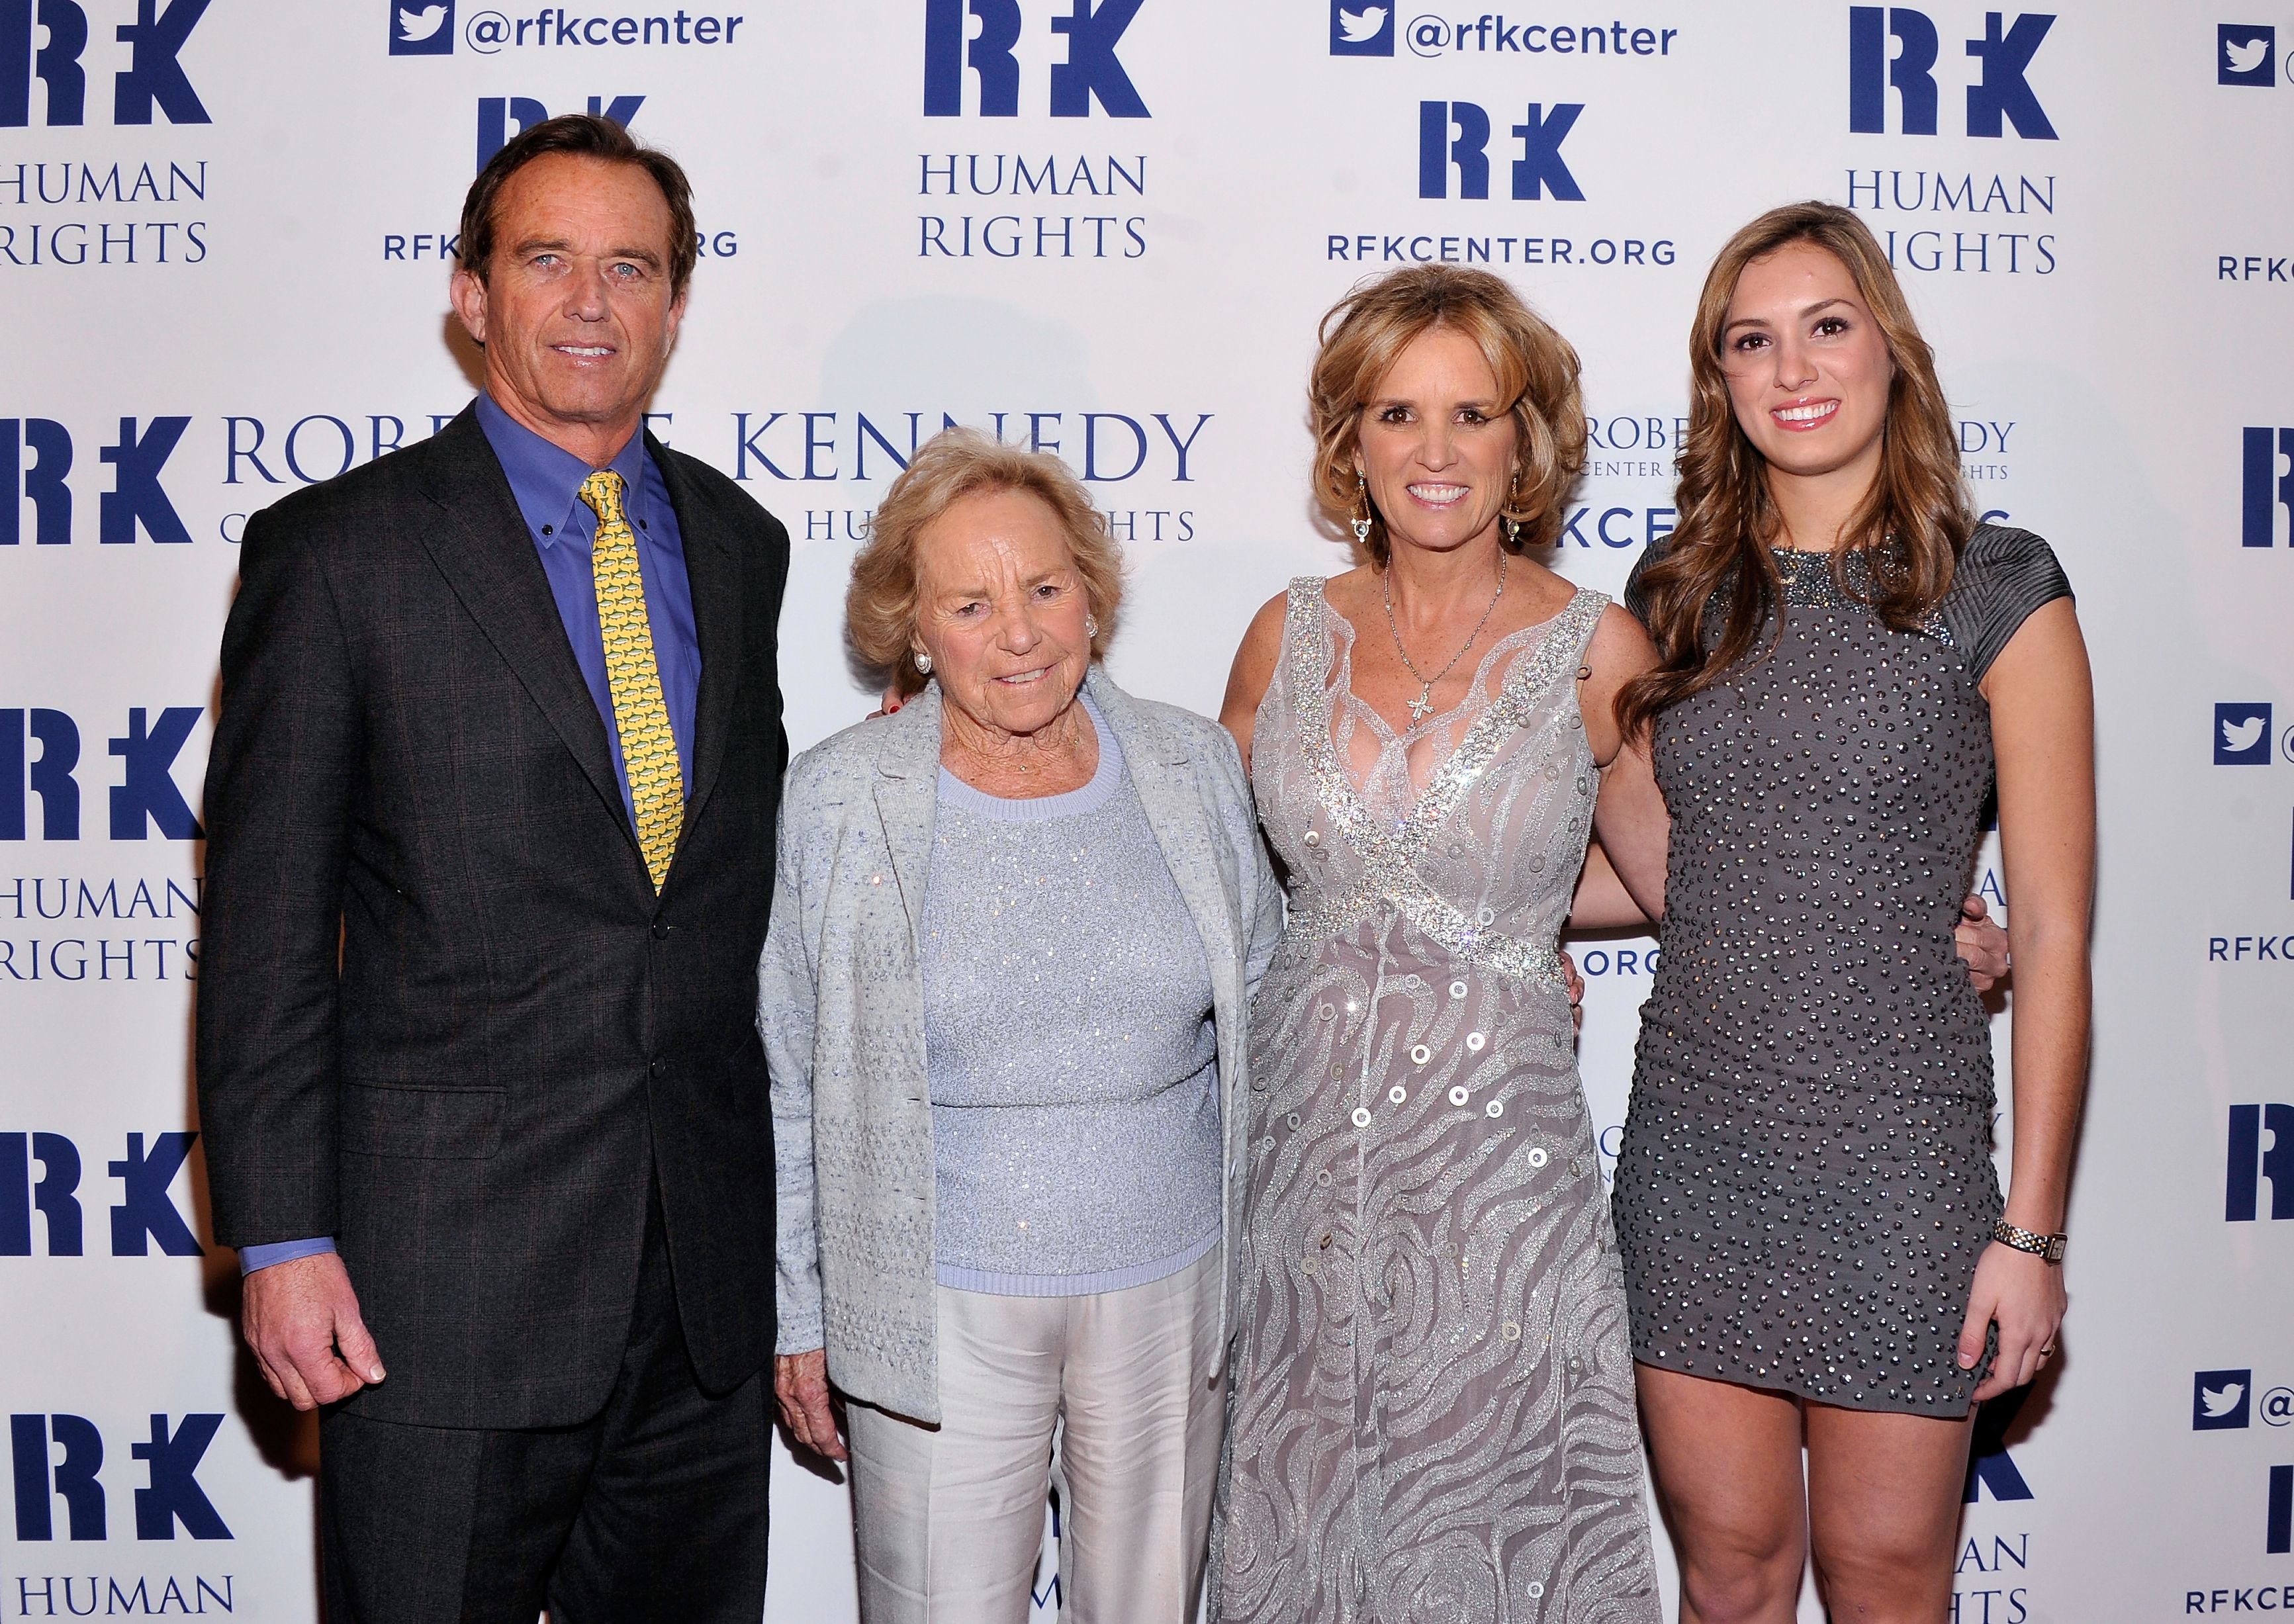 Robert F. Kennedy Jr., Ethel Kennedy, Kerry Kennedy, and Mariah Kennedy Cuomo during the Robert F. Kennedy Center For Justice And Human Rights 2013 Ripple Of Hope Awards Dinner at New York Hilton Midtown on December 11, 2013 in New York City. | Source: Getty Images